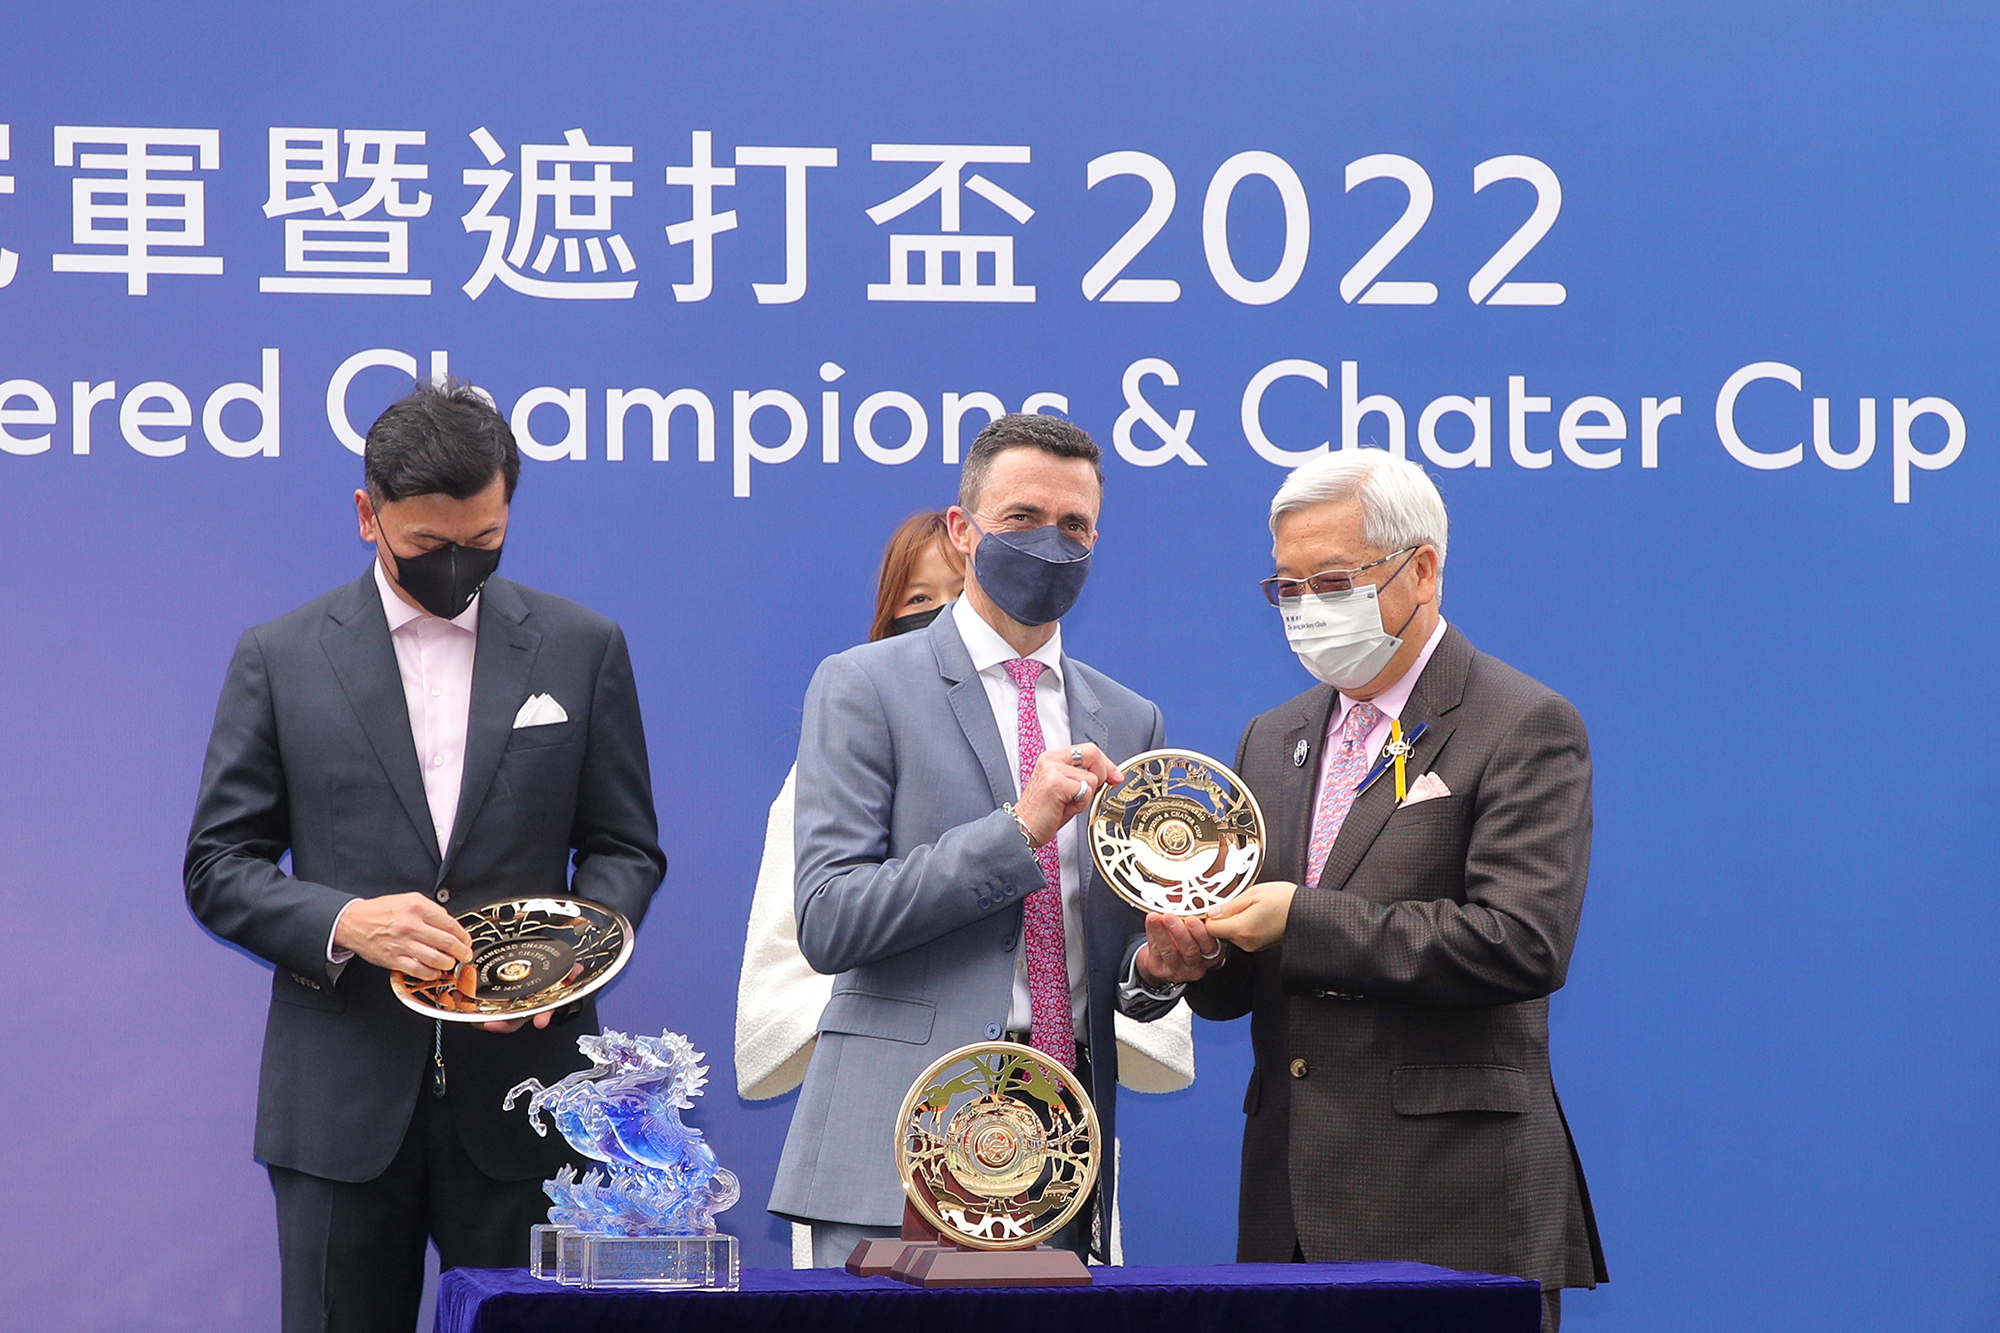 Club Steward Dr Li Ka Cheung presents the trophy and silver dishes to Owner Mr & Mrs Mike Cheung Shun Ching, trainer Douglas Whyte and jockey Blake Shinn.